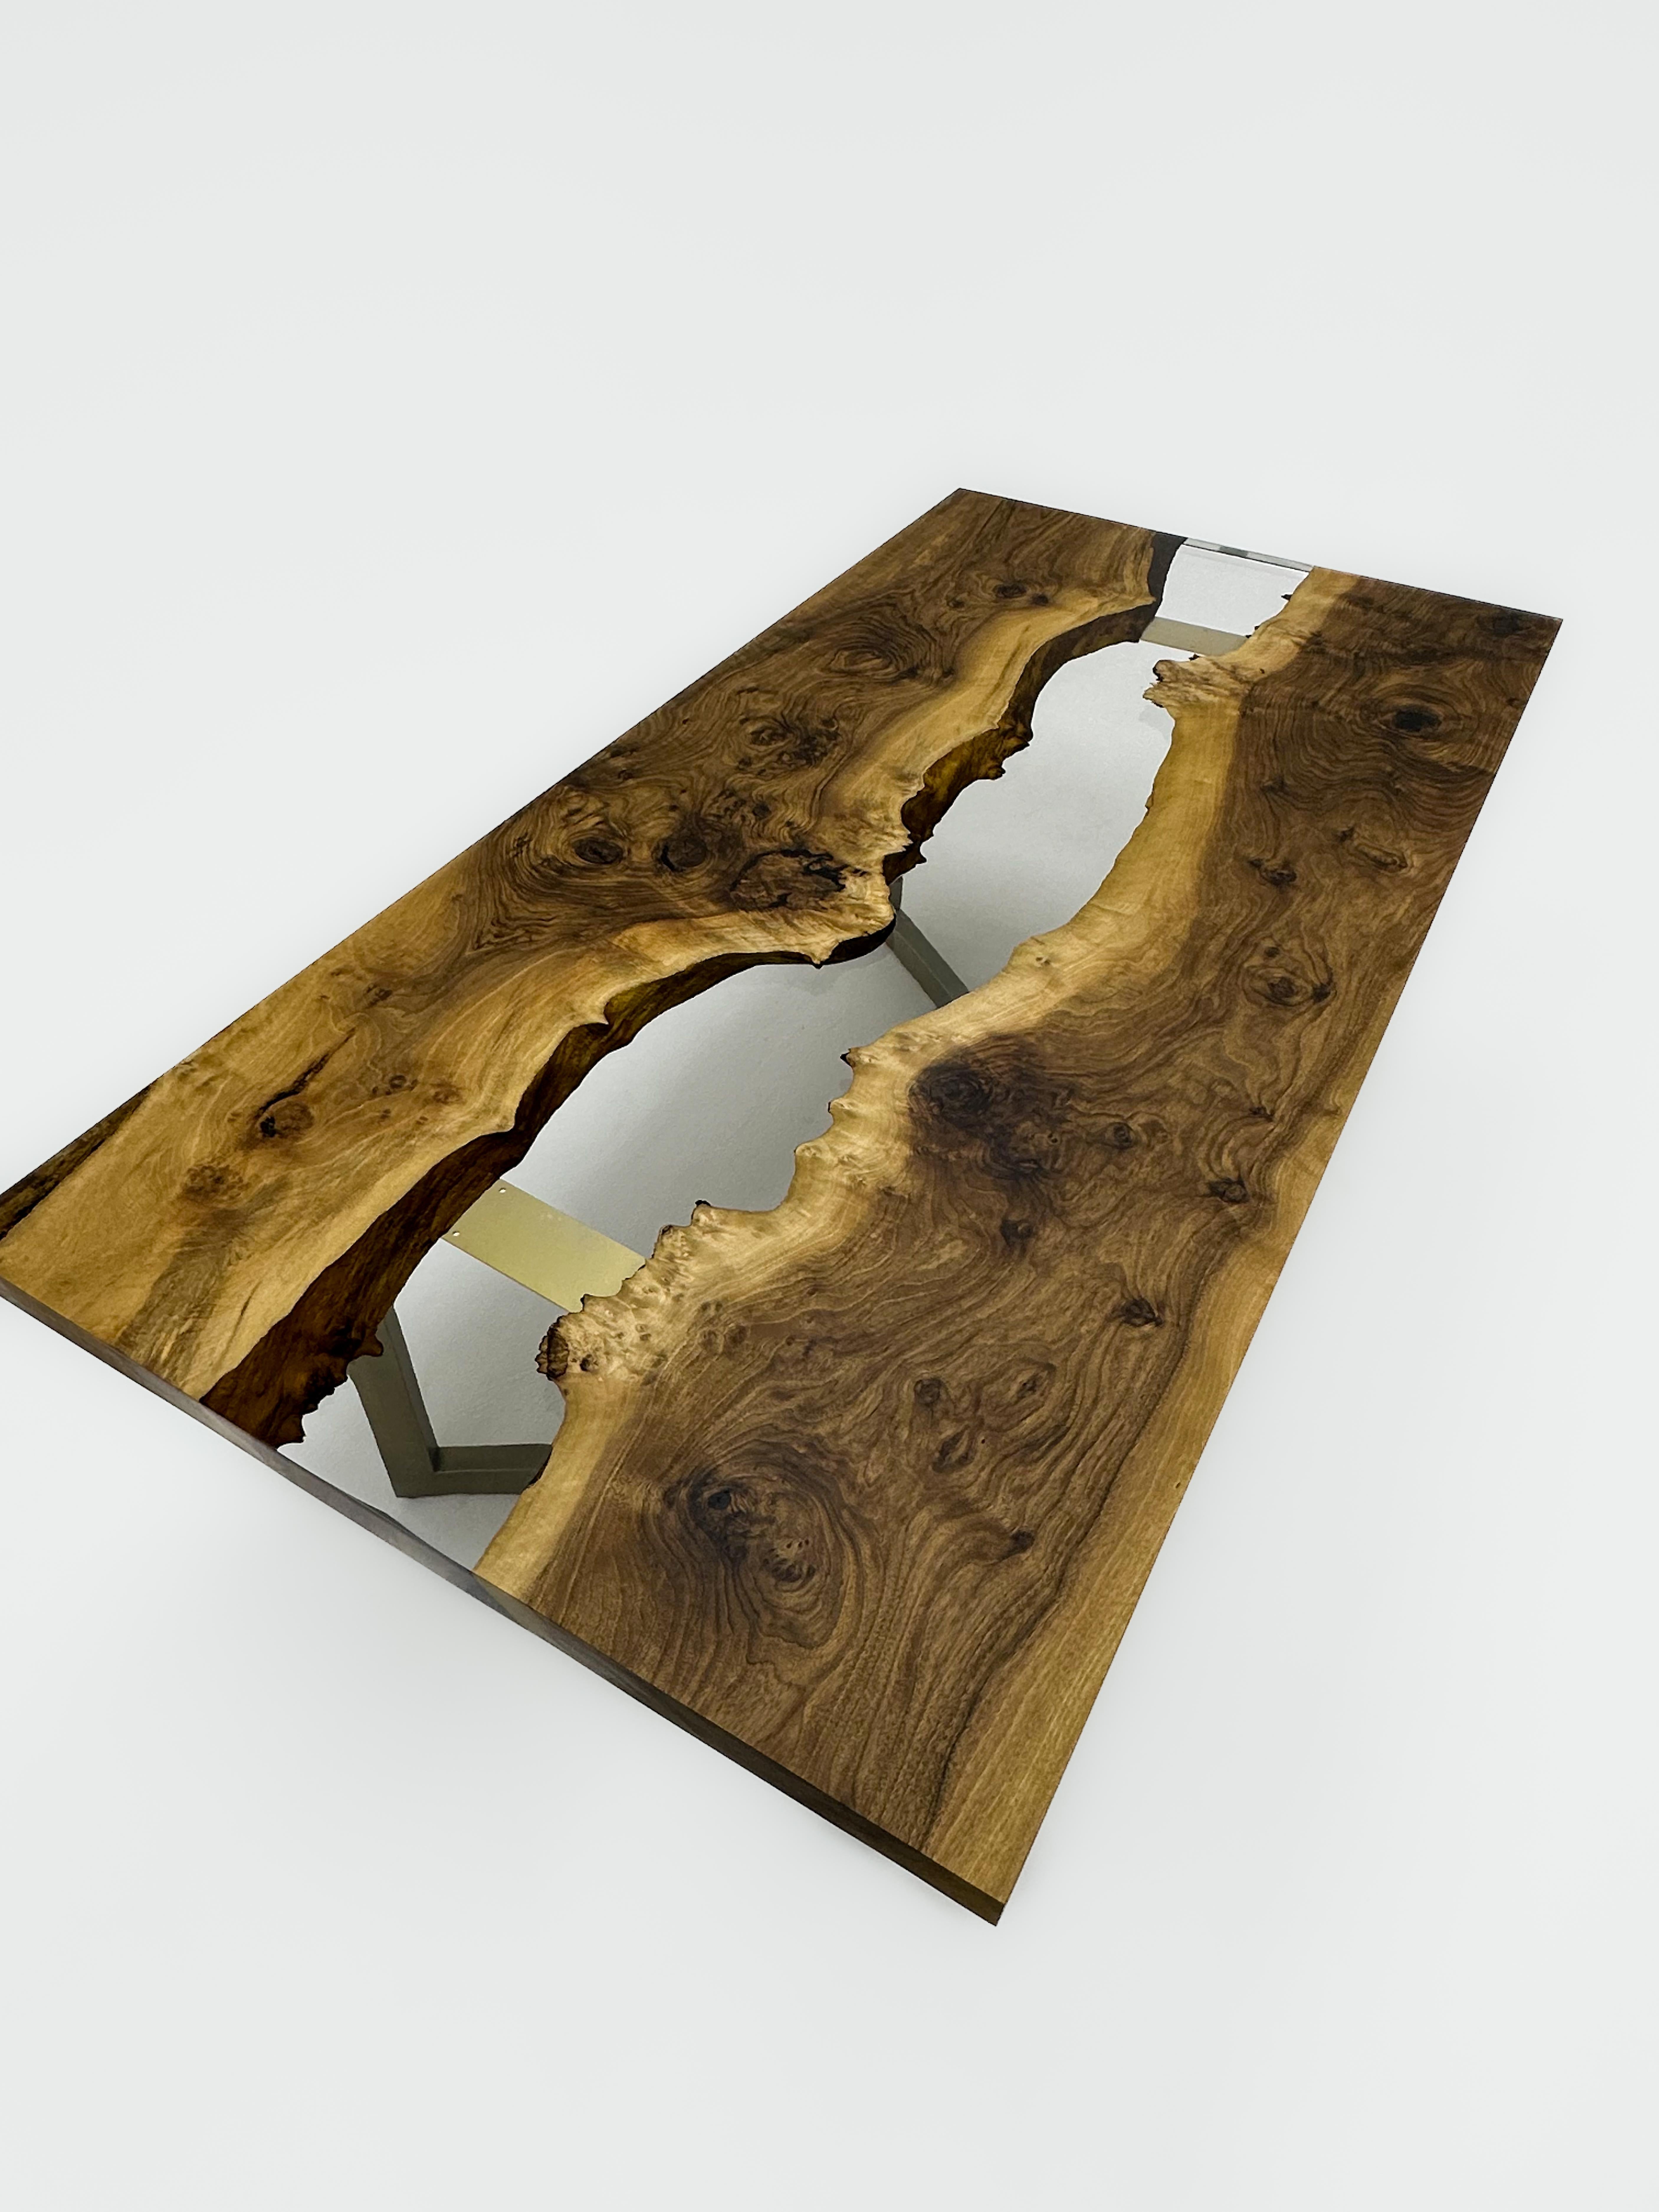 Walnut Custom Clear Epoxy Resin Dining Table 

This table is made of 500 years old Walnut Wood. The grains and texture of the wood describe what a natural walnut woods looks like.
It can be used as a dining table or as a conference table. Suitable